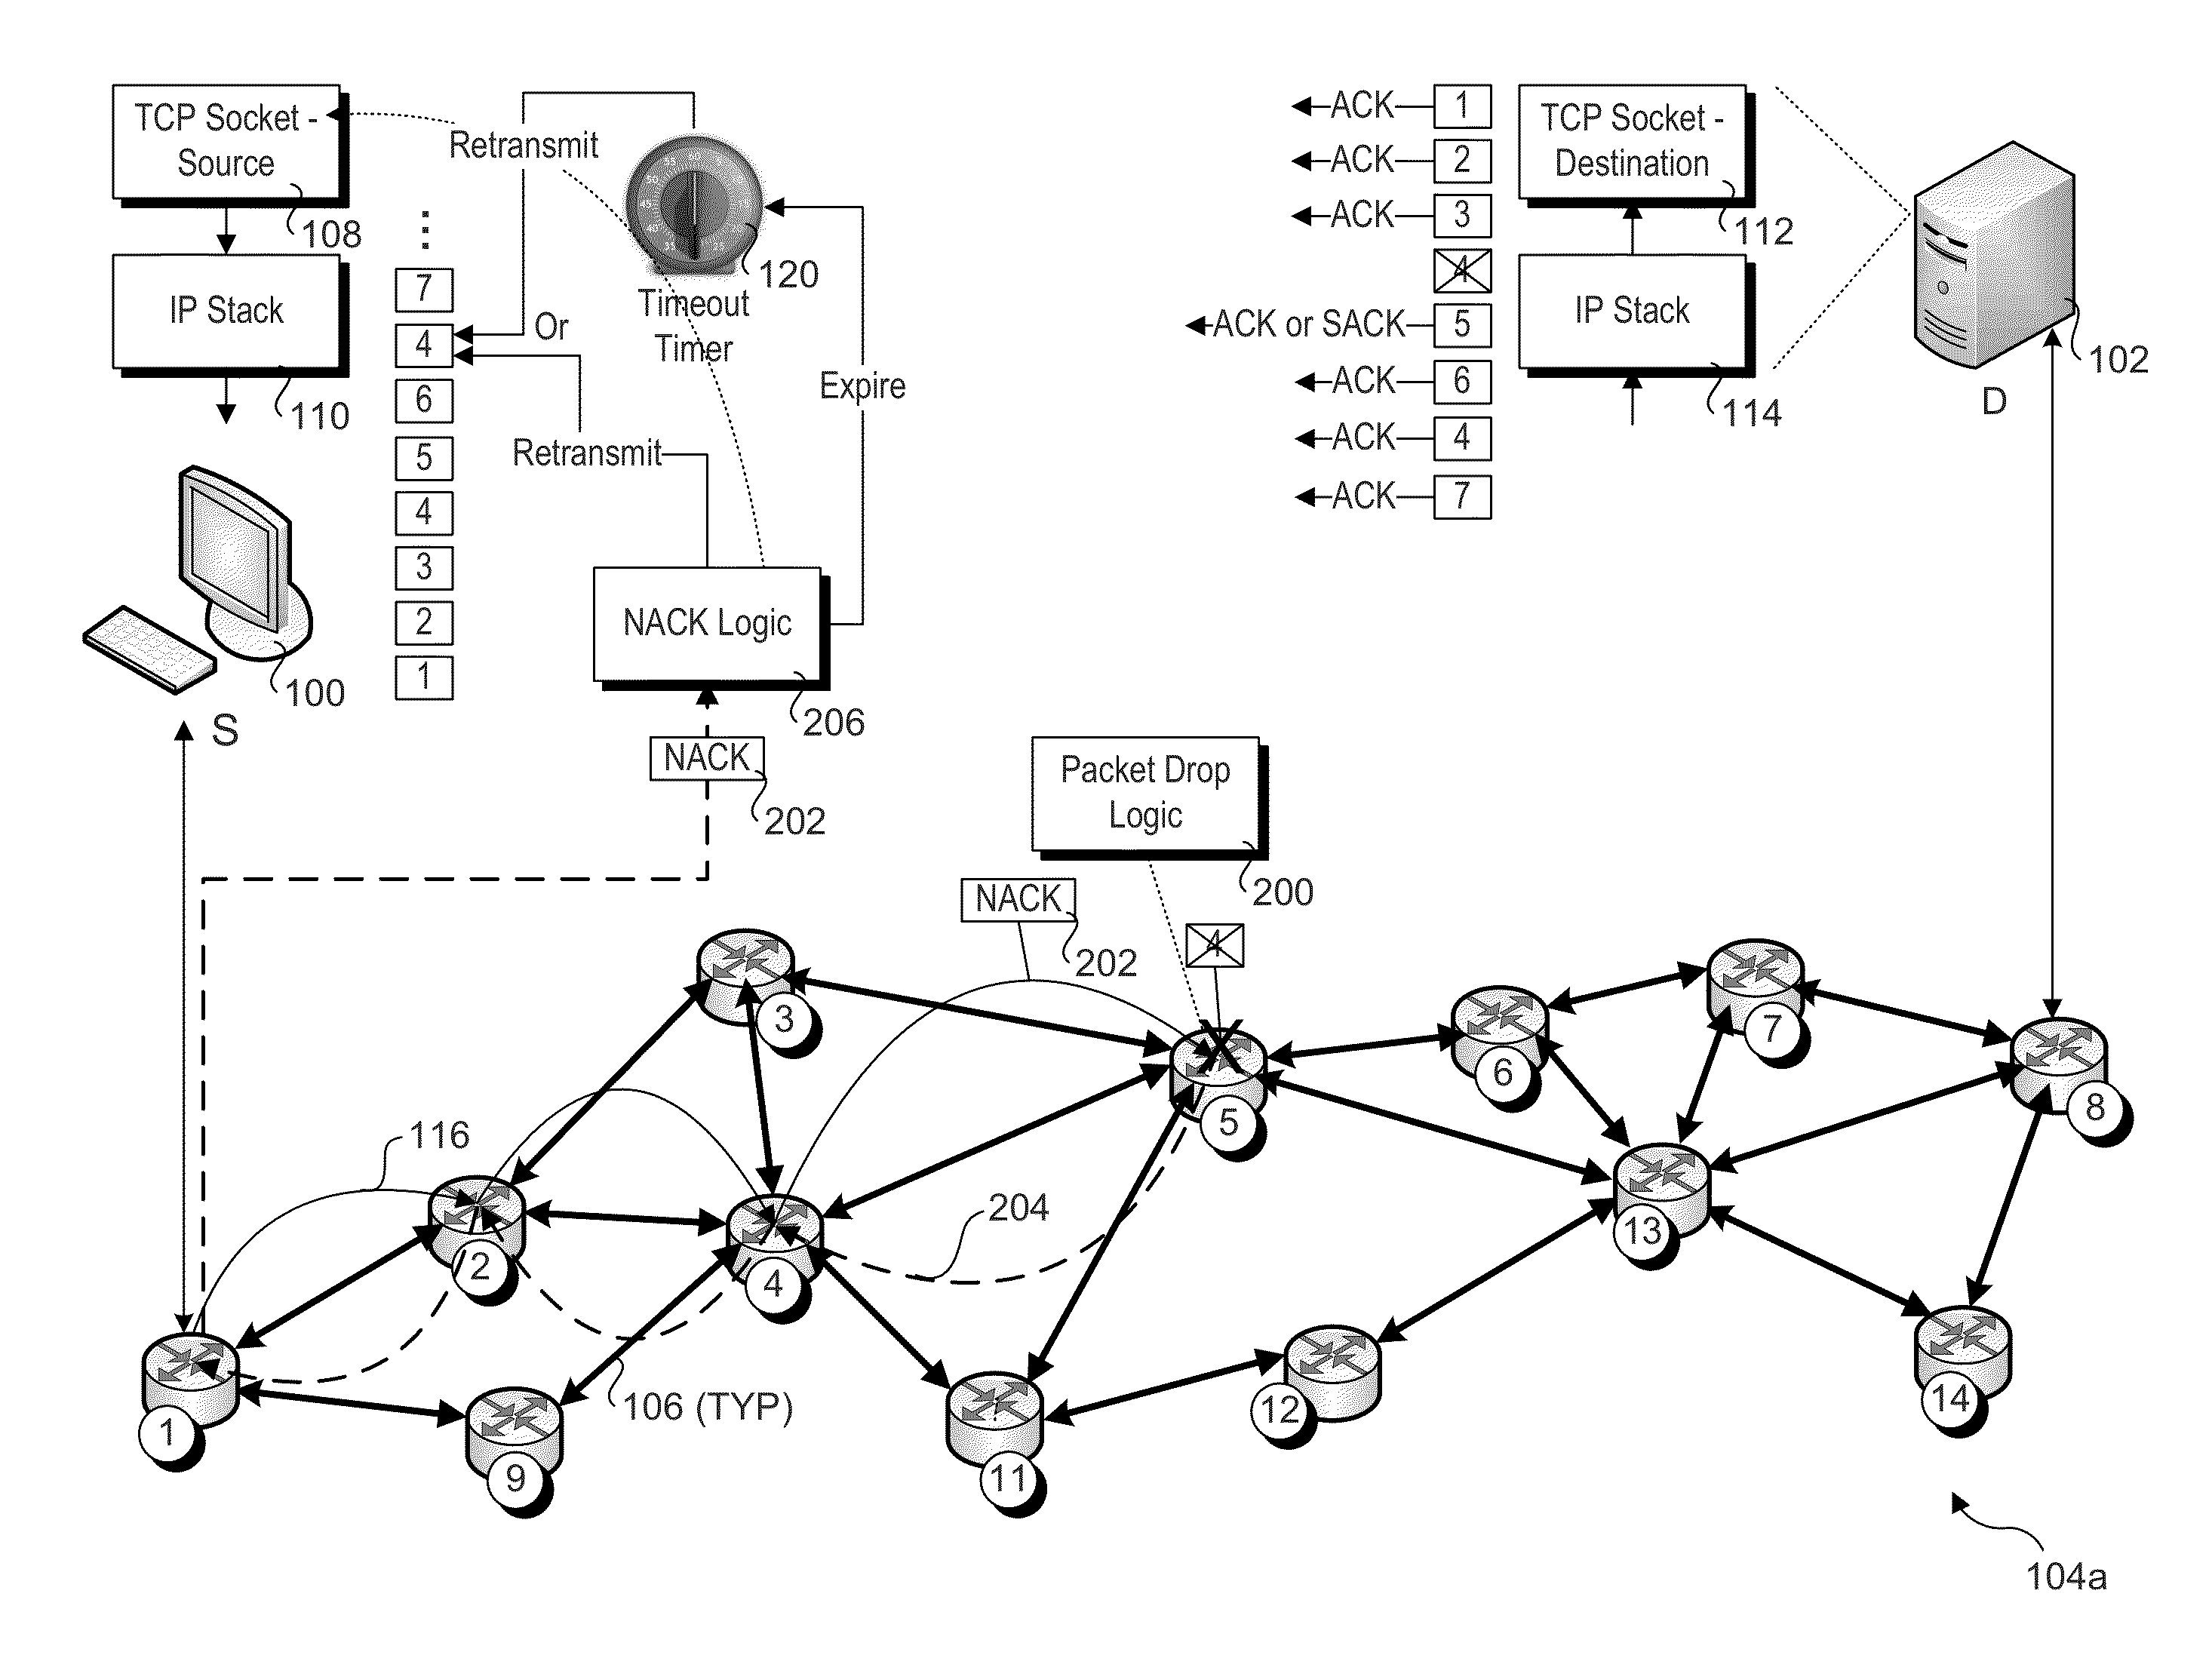 Notification by network element of packet drops